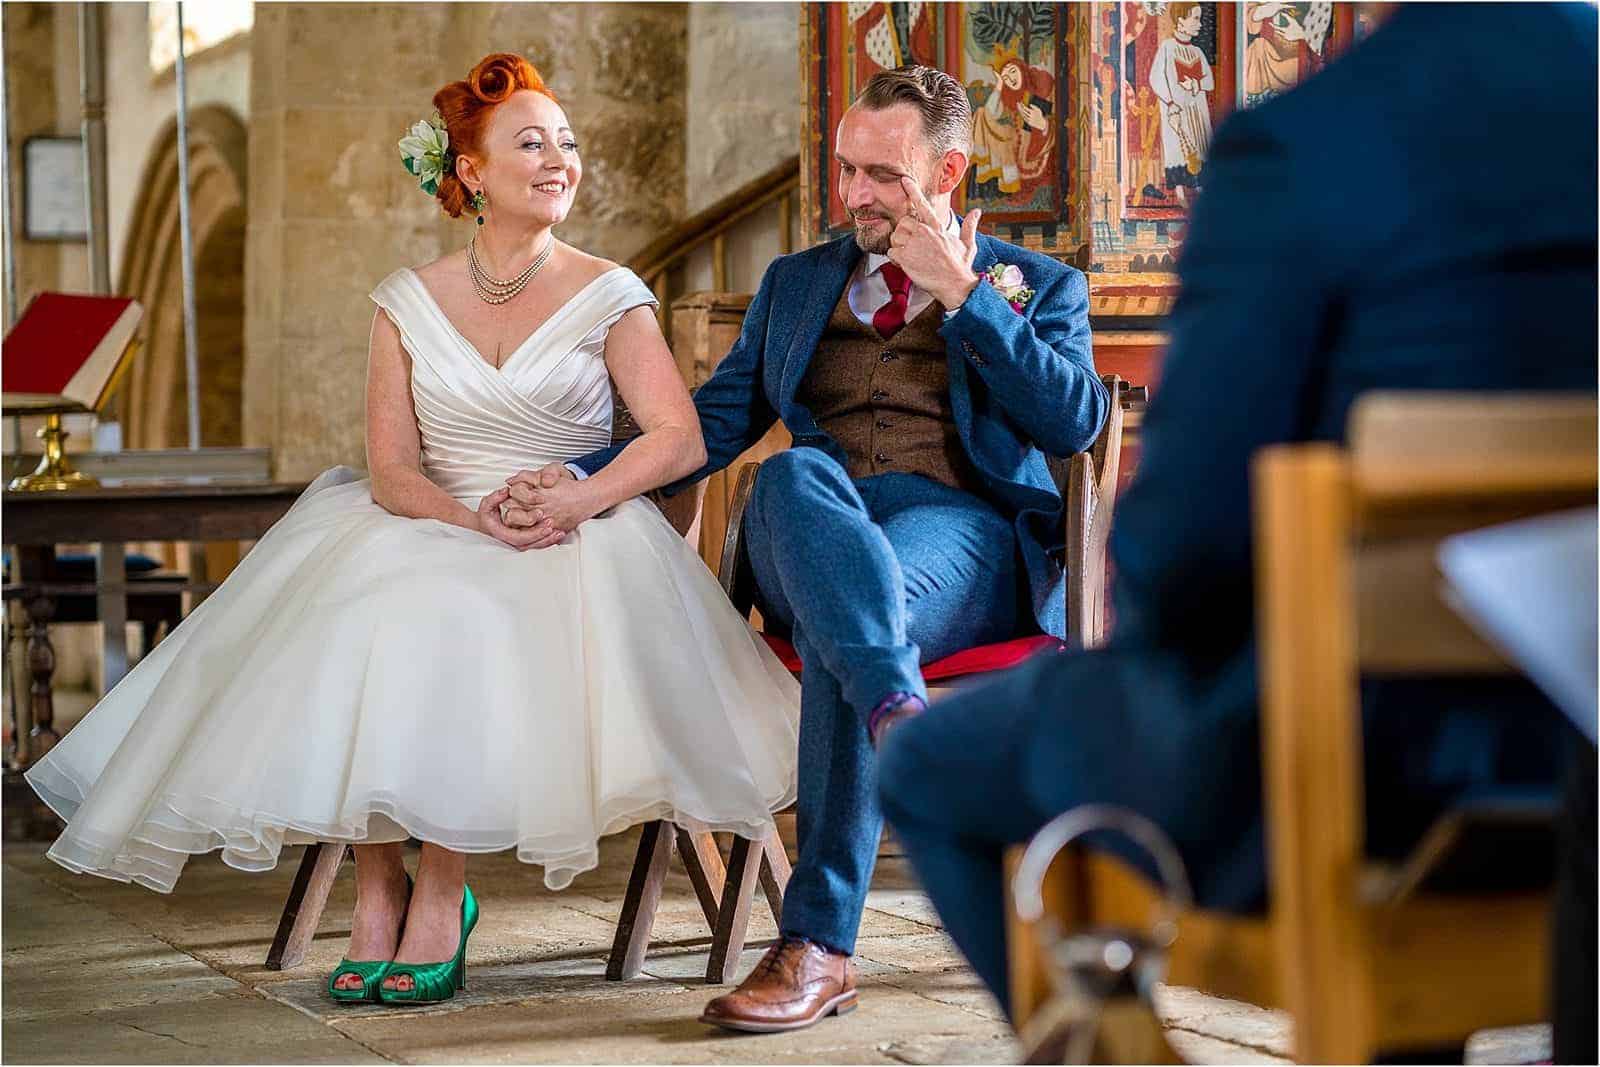 bride smiling at groom whilst he wipes a tear away - best wedding photography in warwickshire 2019